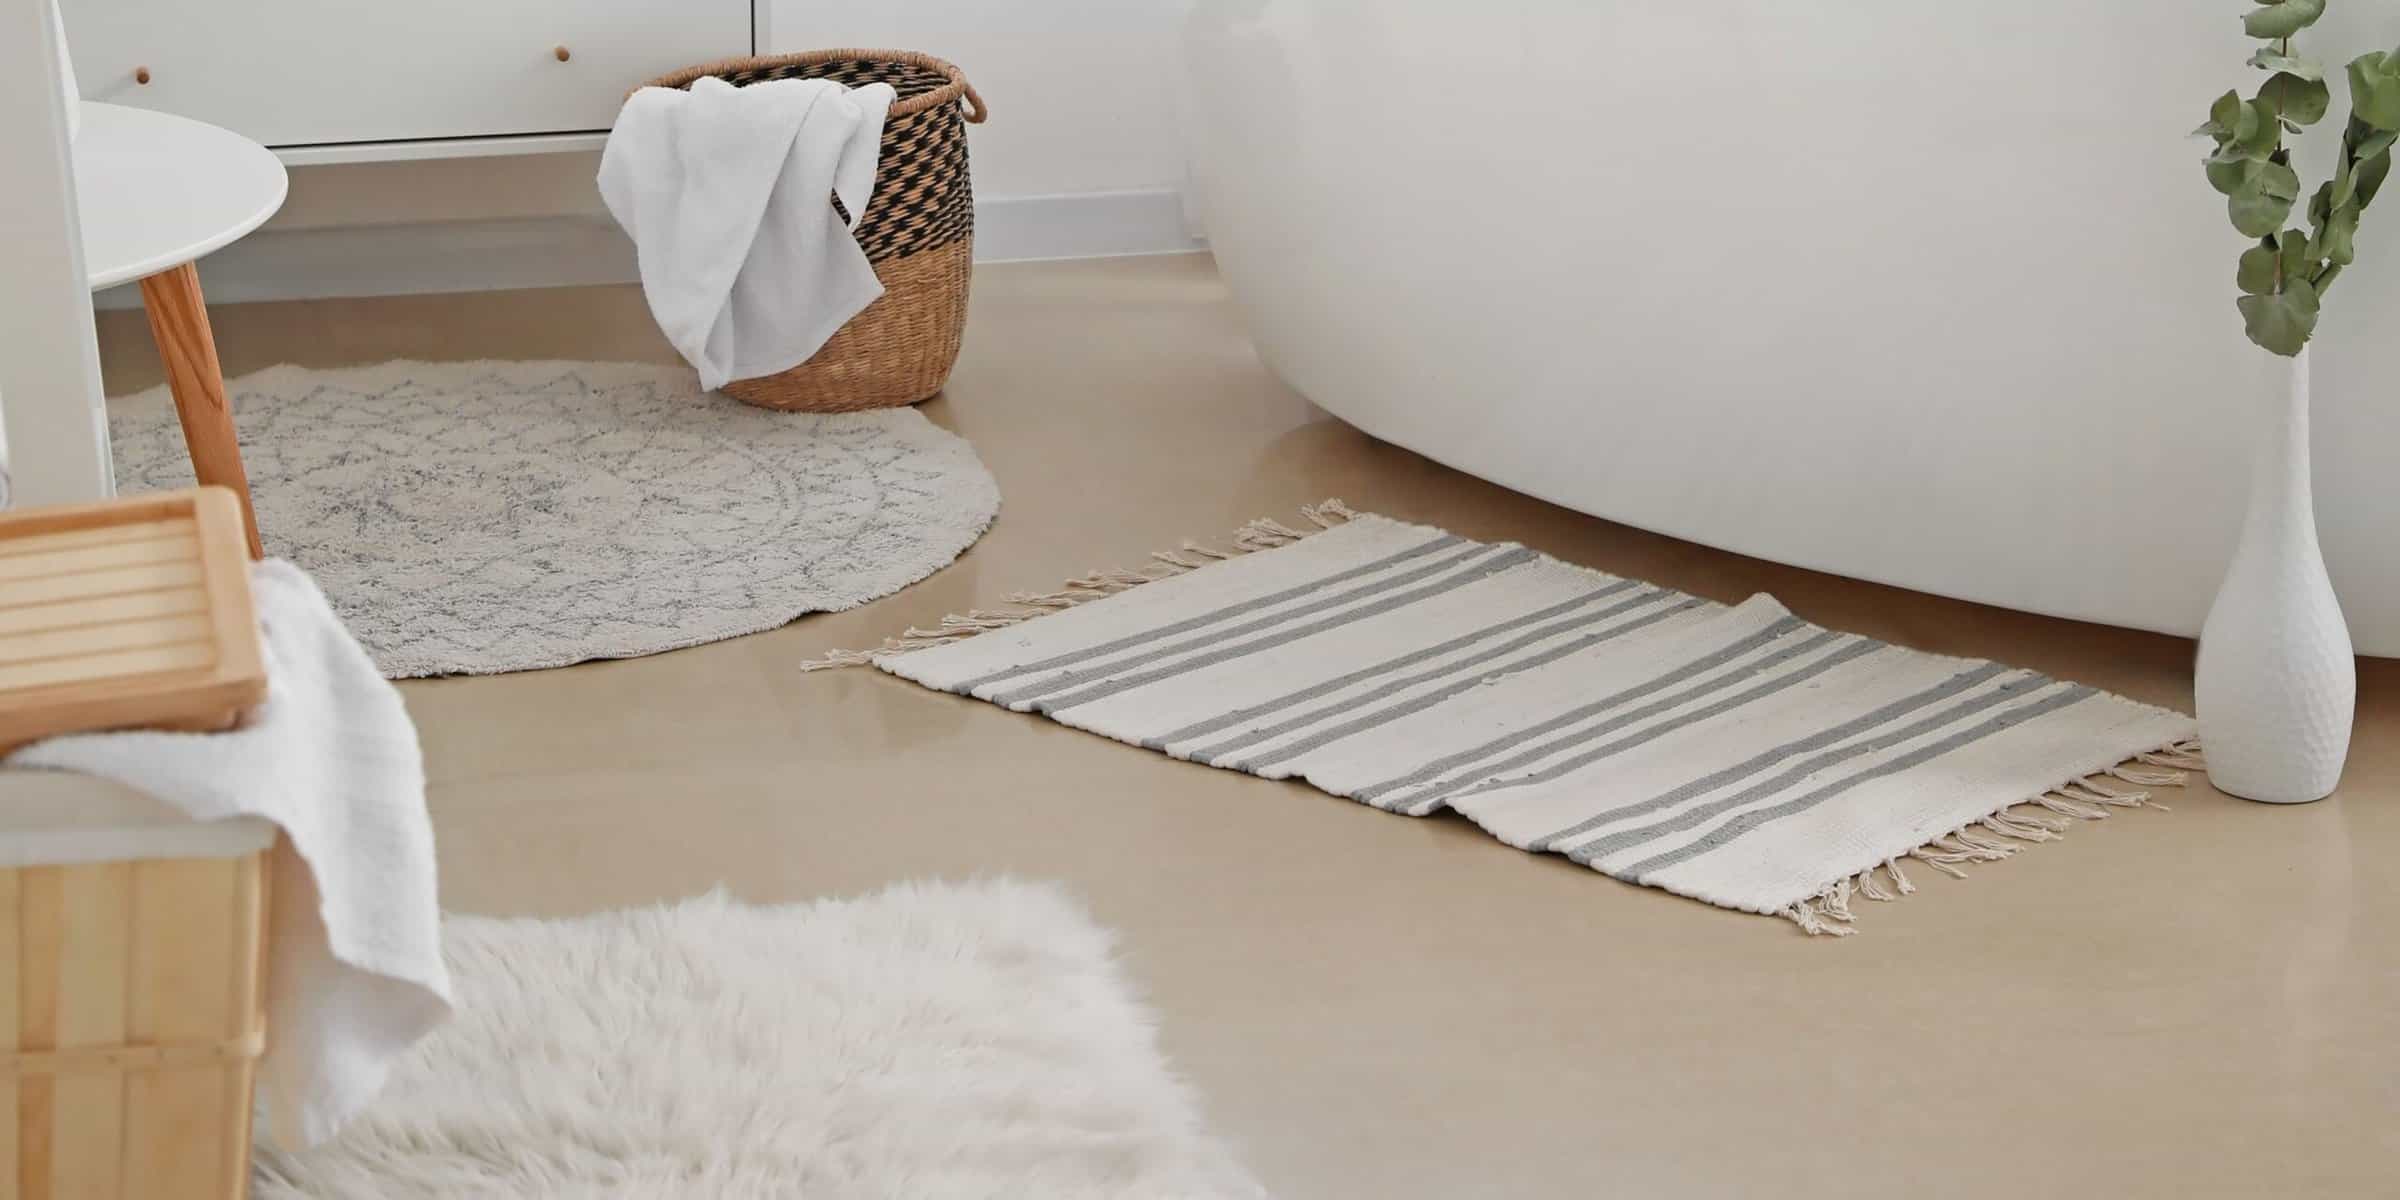 How to Clean Bathroom Rugs the Right way: Say Bye to Dirt